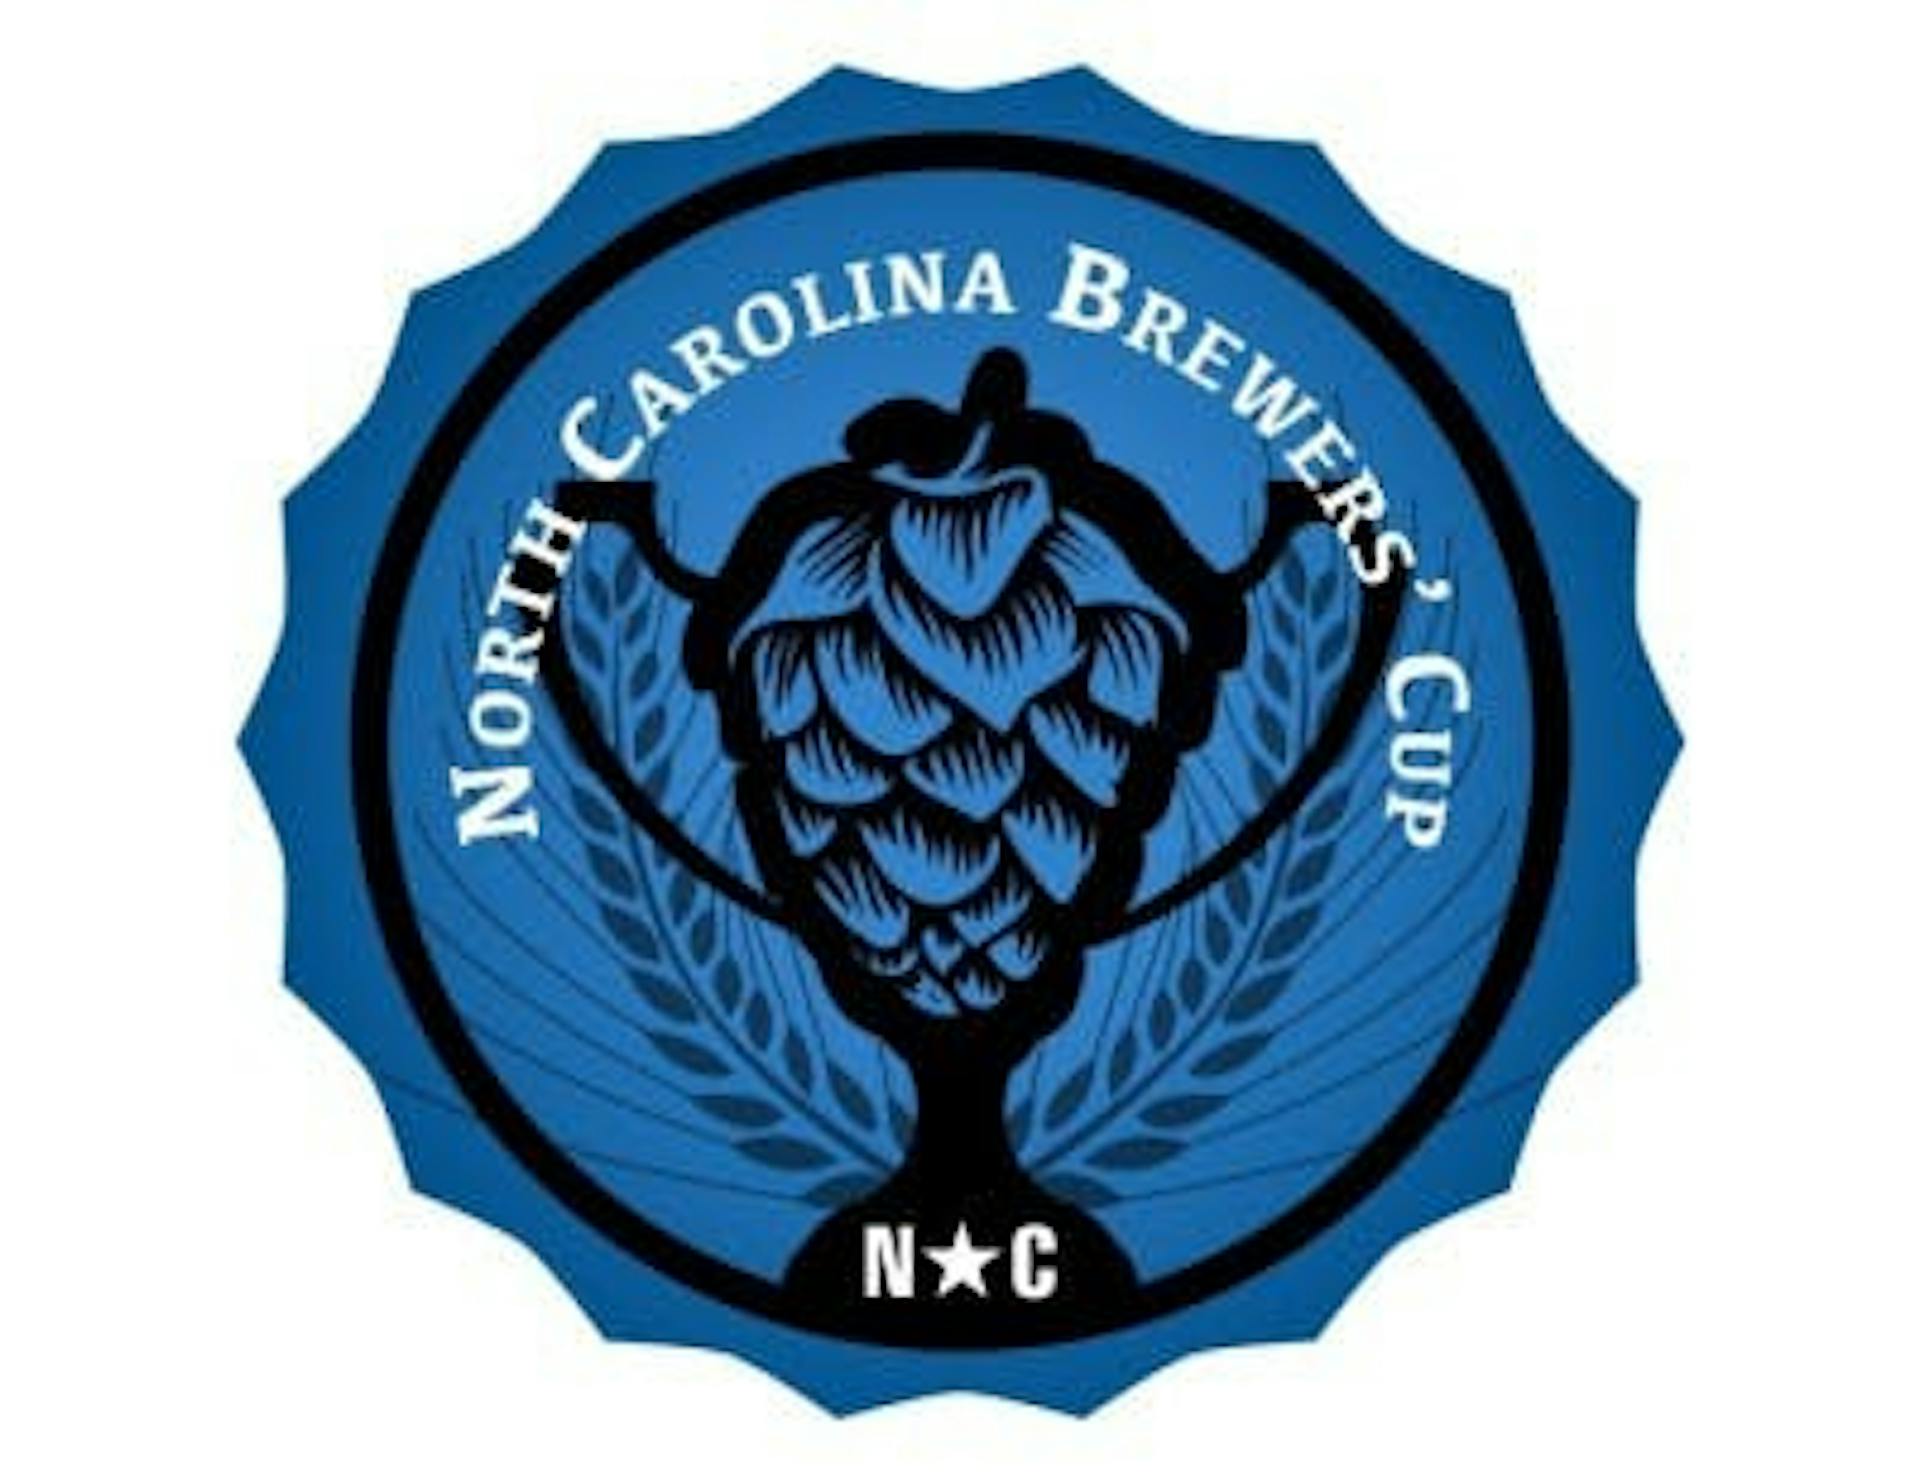 nc_brewers_cup_logo-e1444429489771